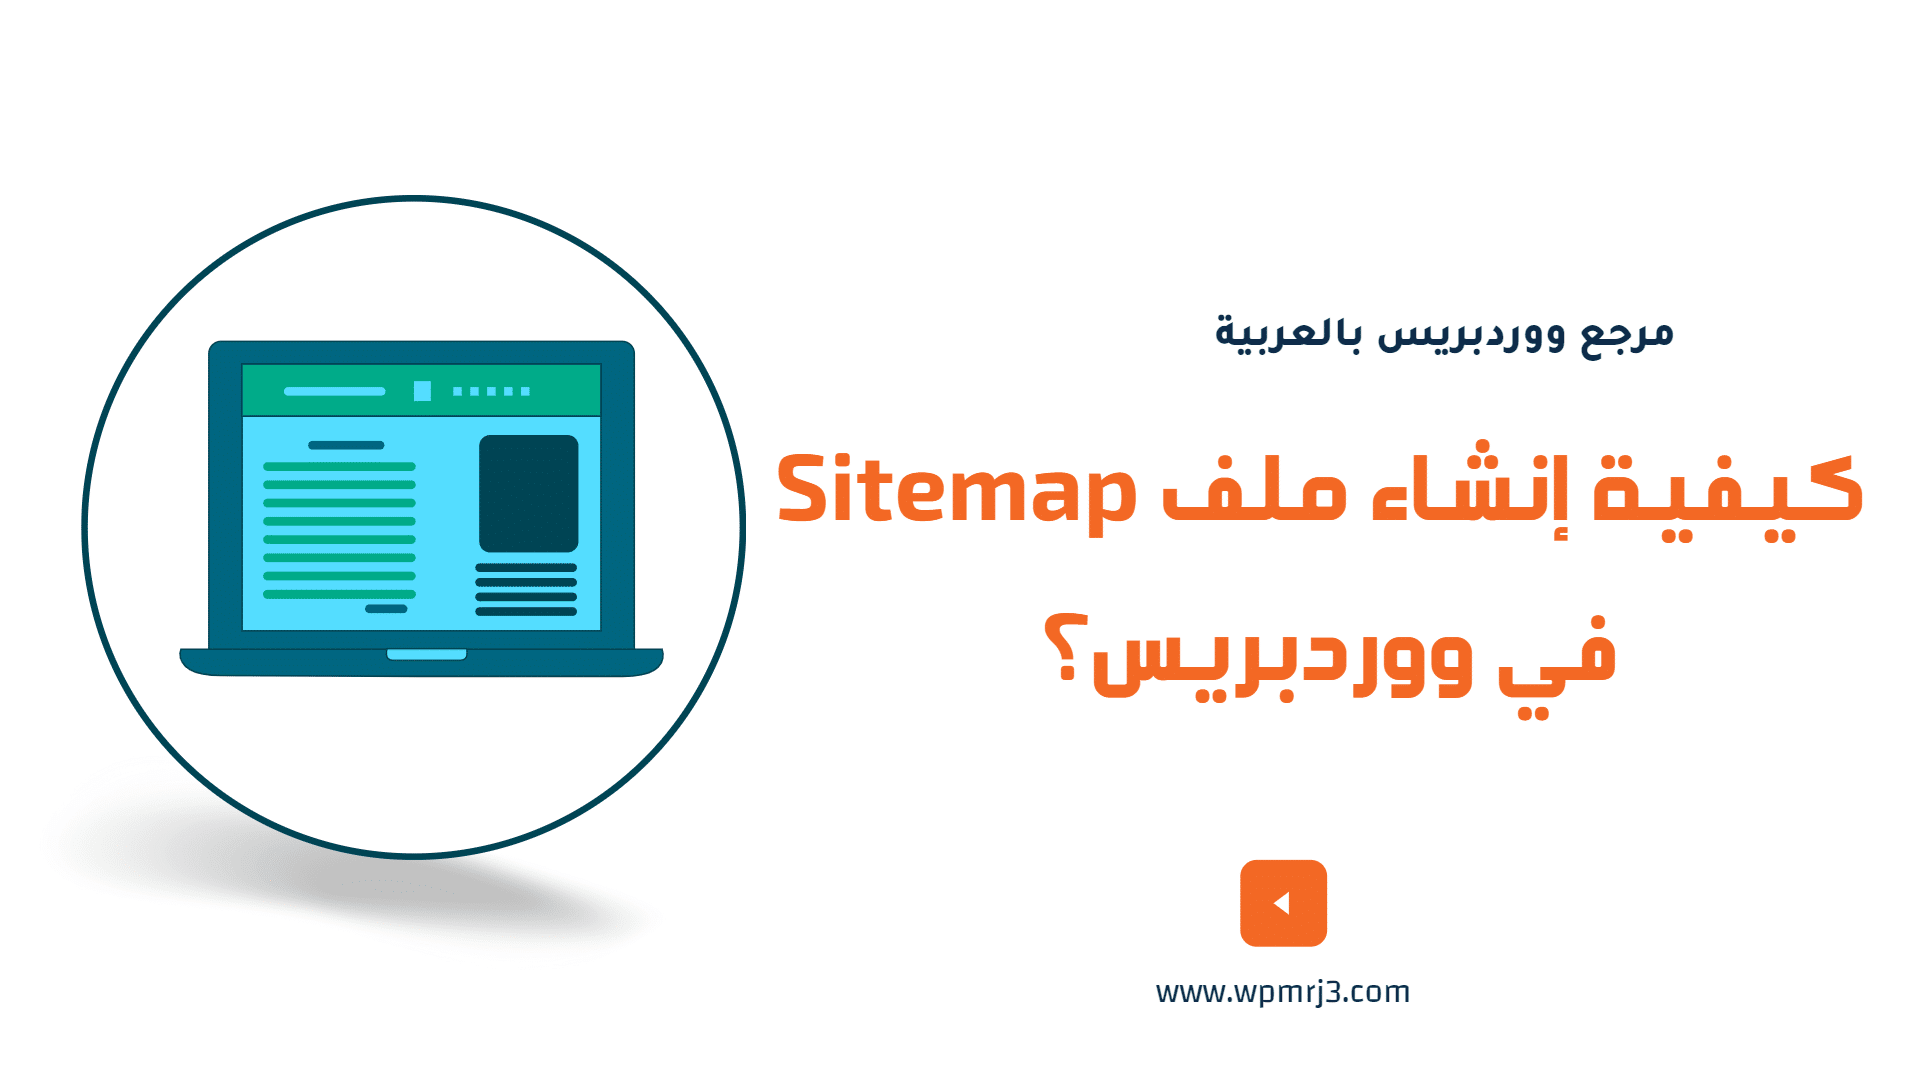 What is a sitemap? How to create a sitemap in WordPress?